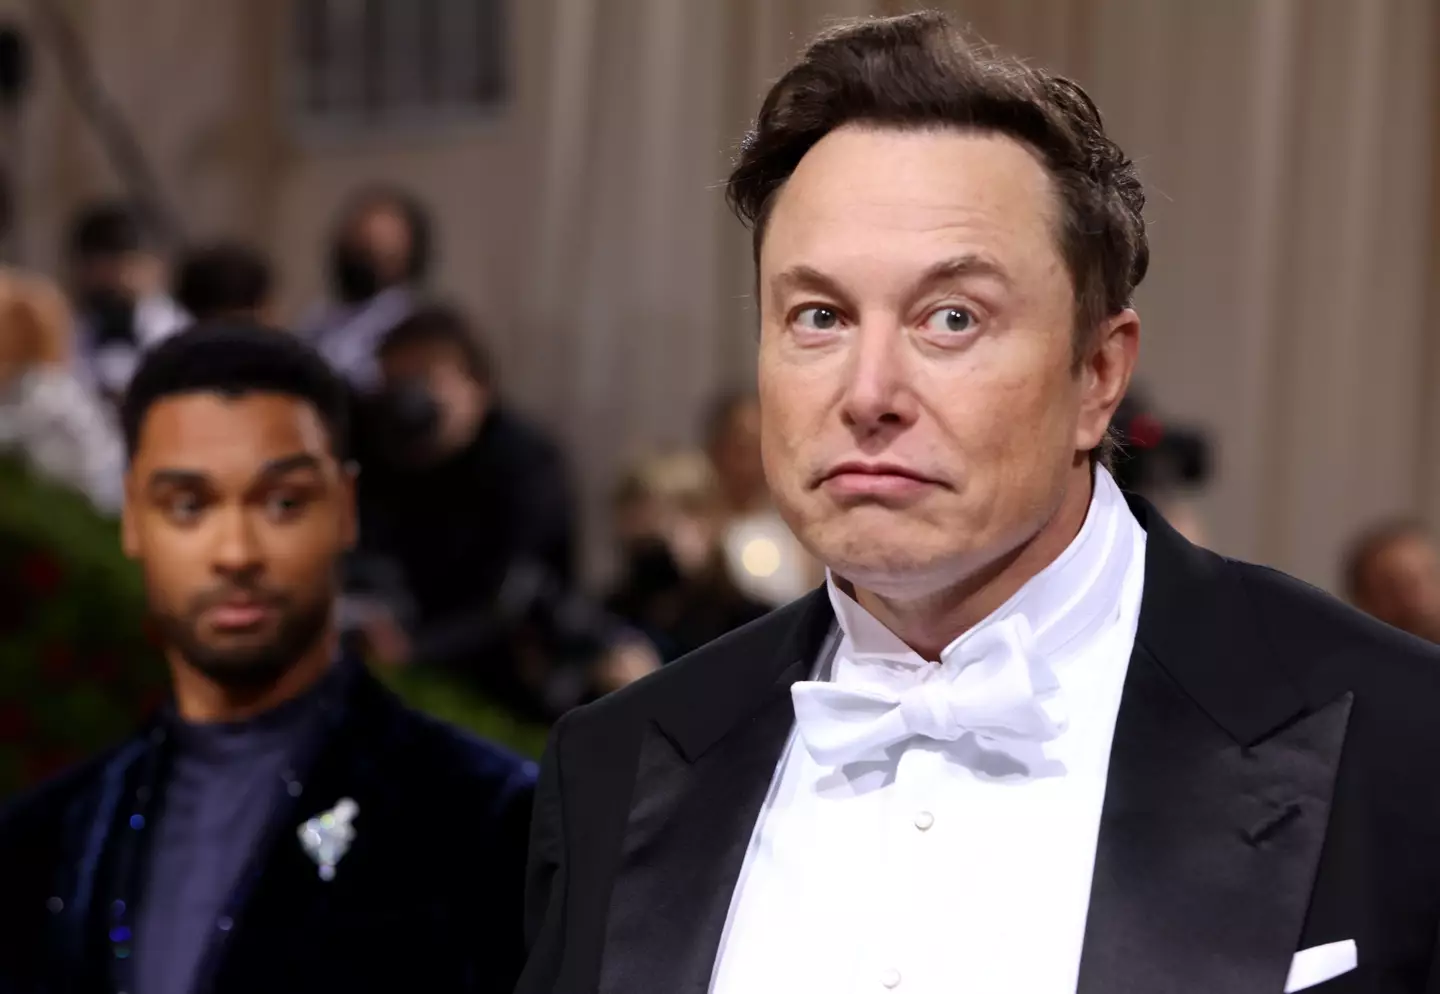 Elon Musk recently rubbished reports of sexual misconduct.